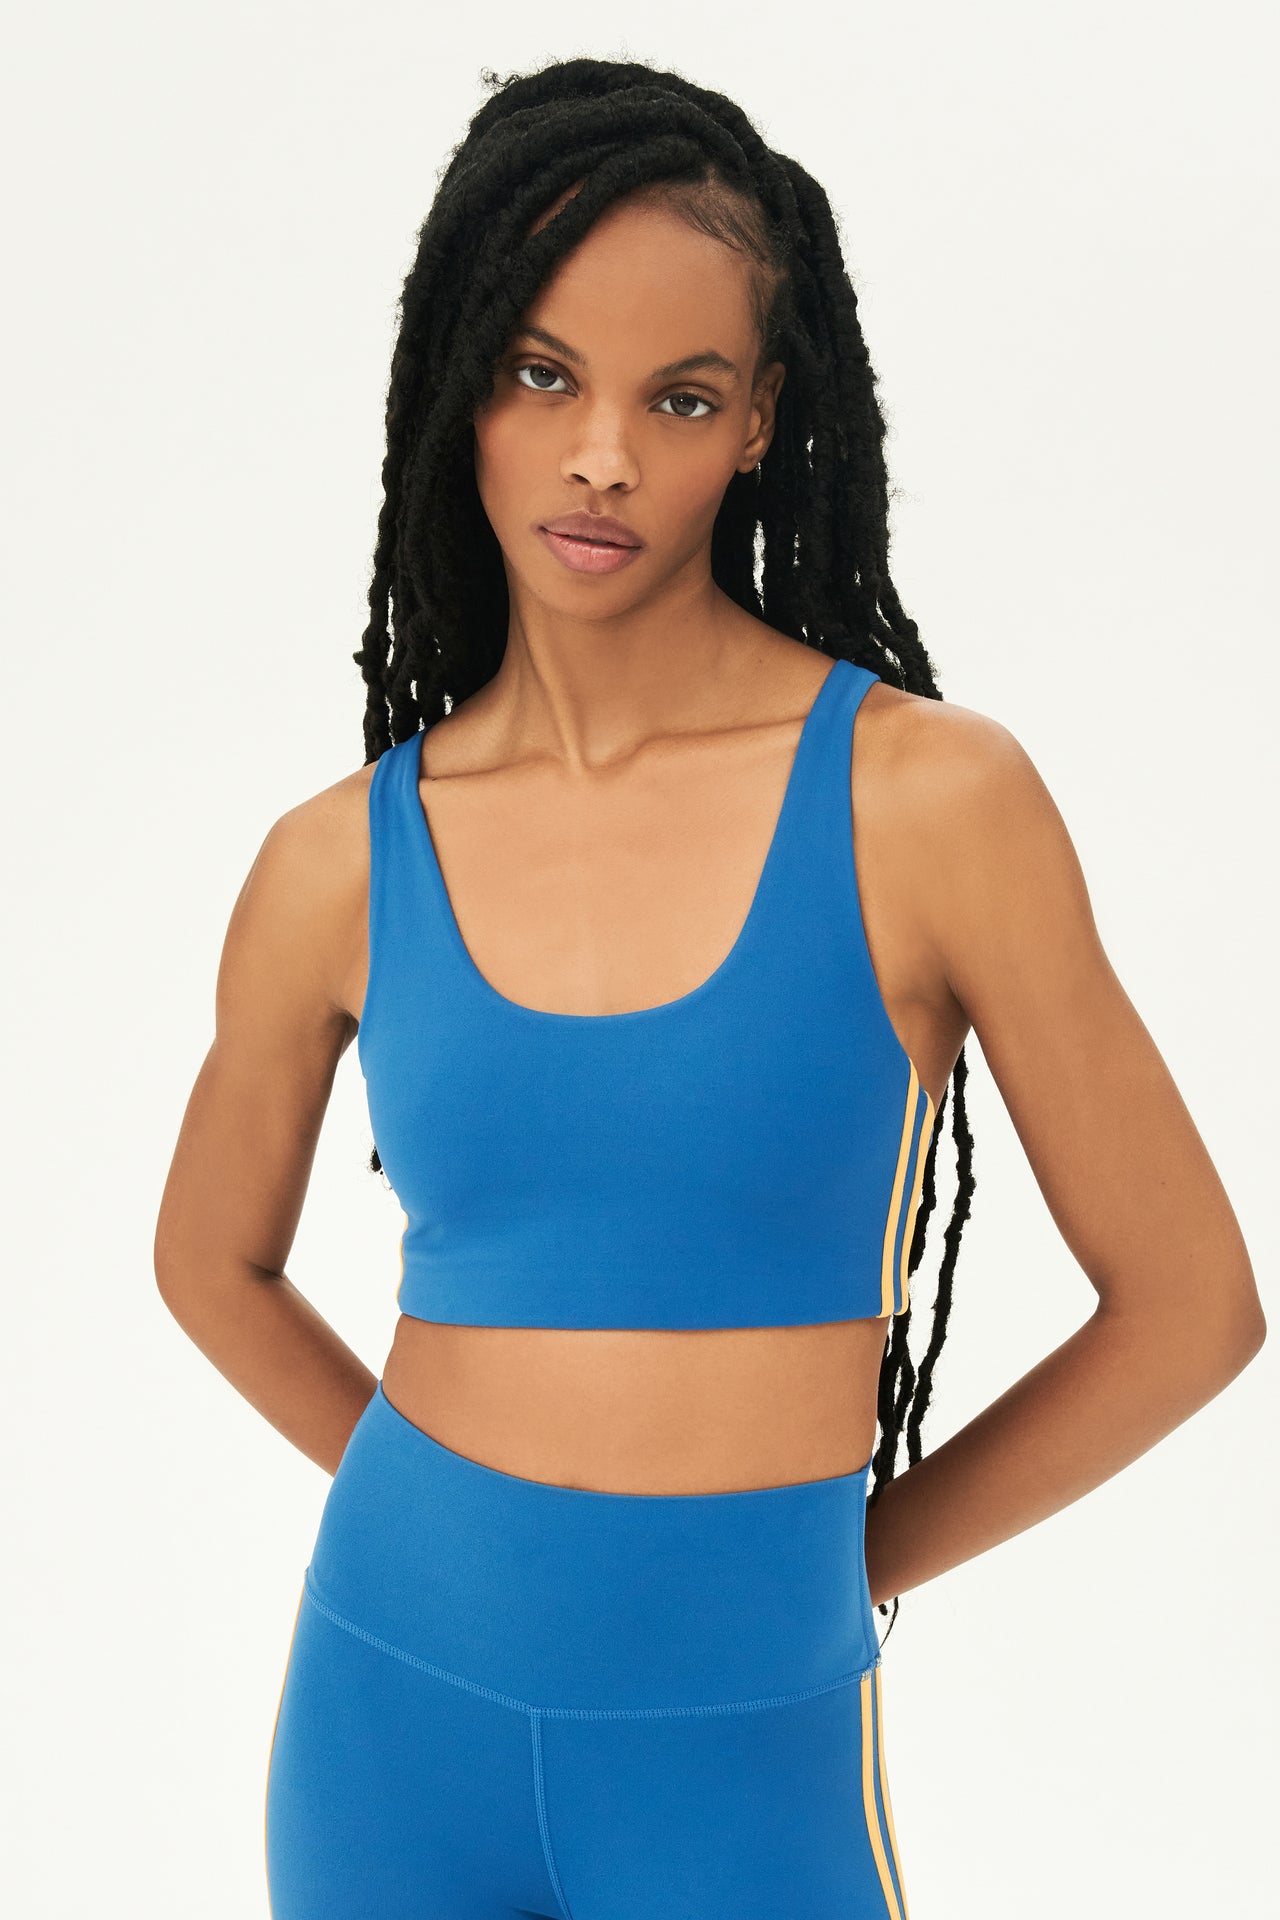 Front view of girl wearing blue sports bra with two thin yellow stripes down the side and blue leggings 